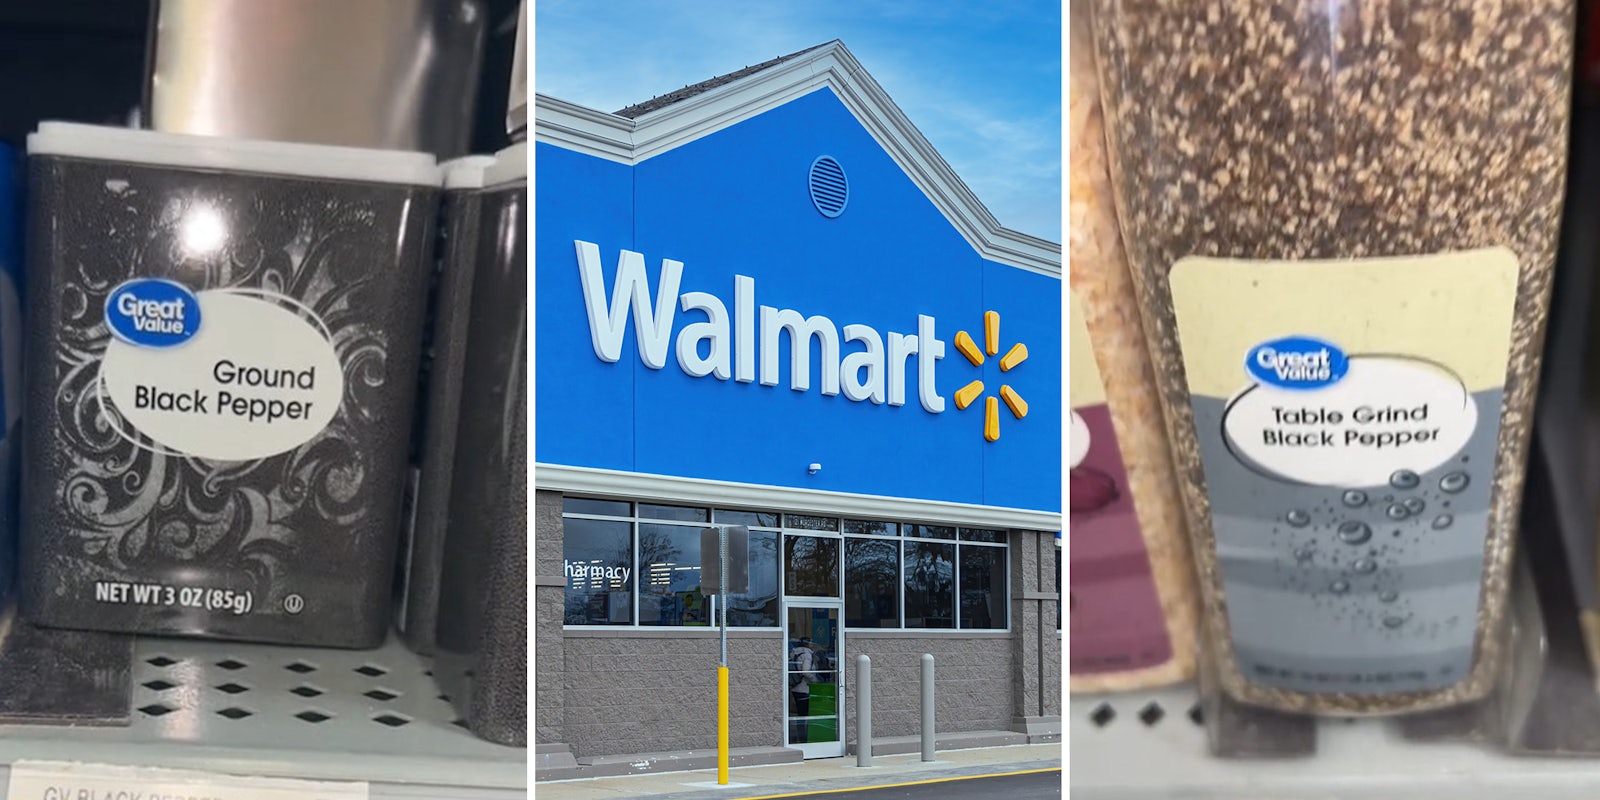 Walmart shopper discovers 2 kinds of Great Value pepper